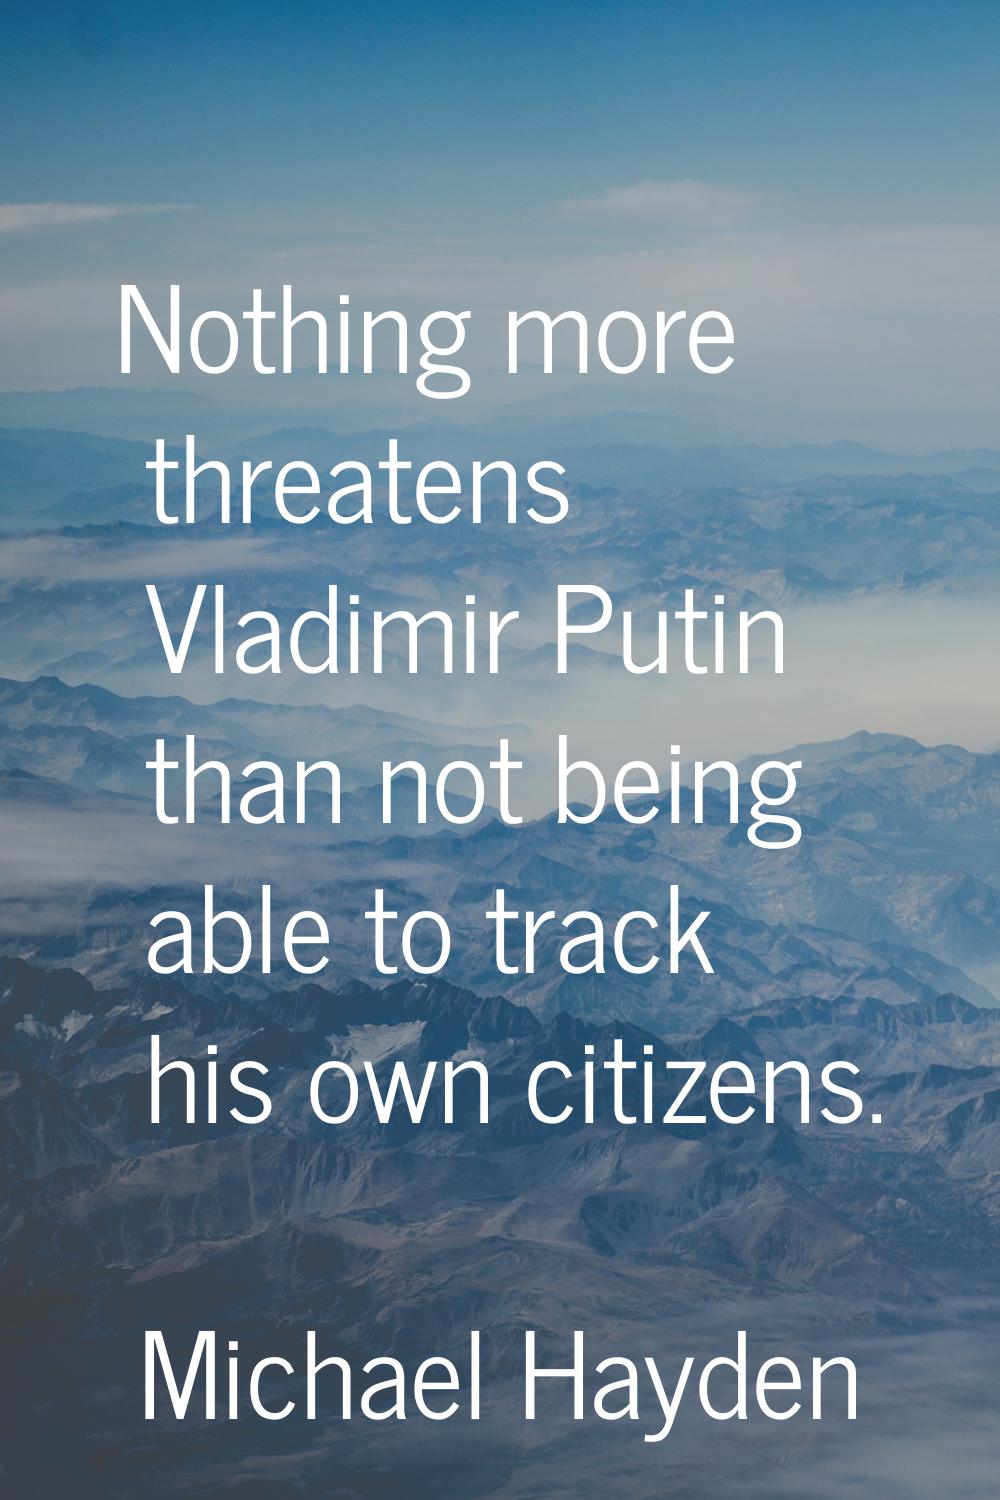 Nothing more threatens Vladimir Putin than not being able to track his own citizens.